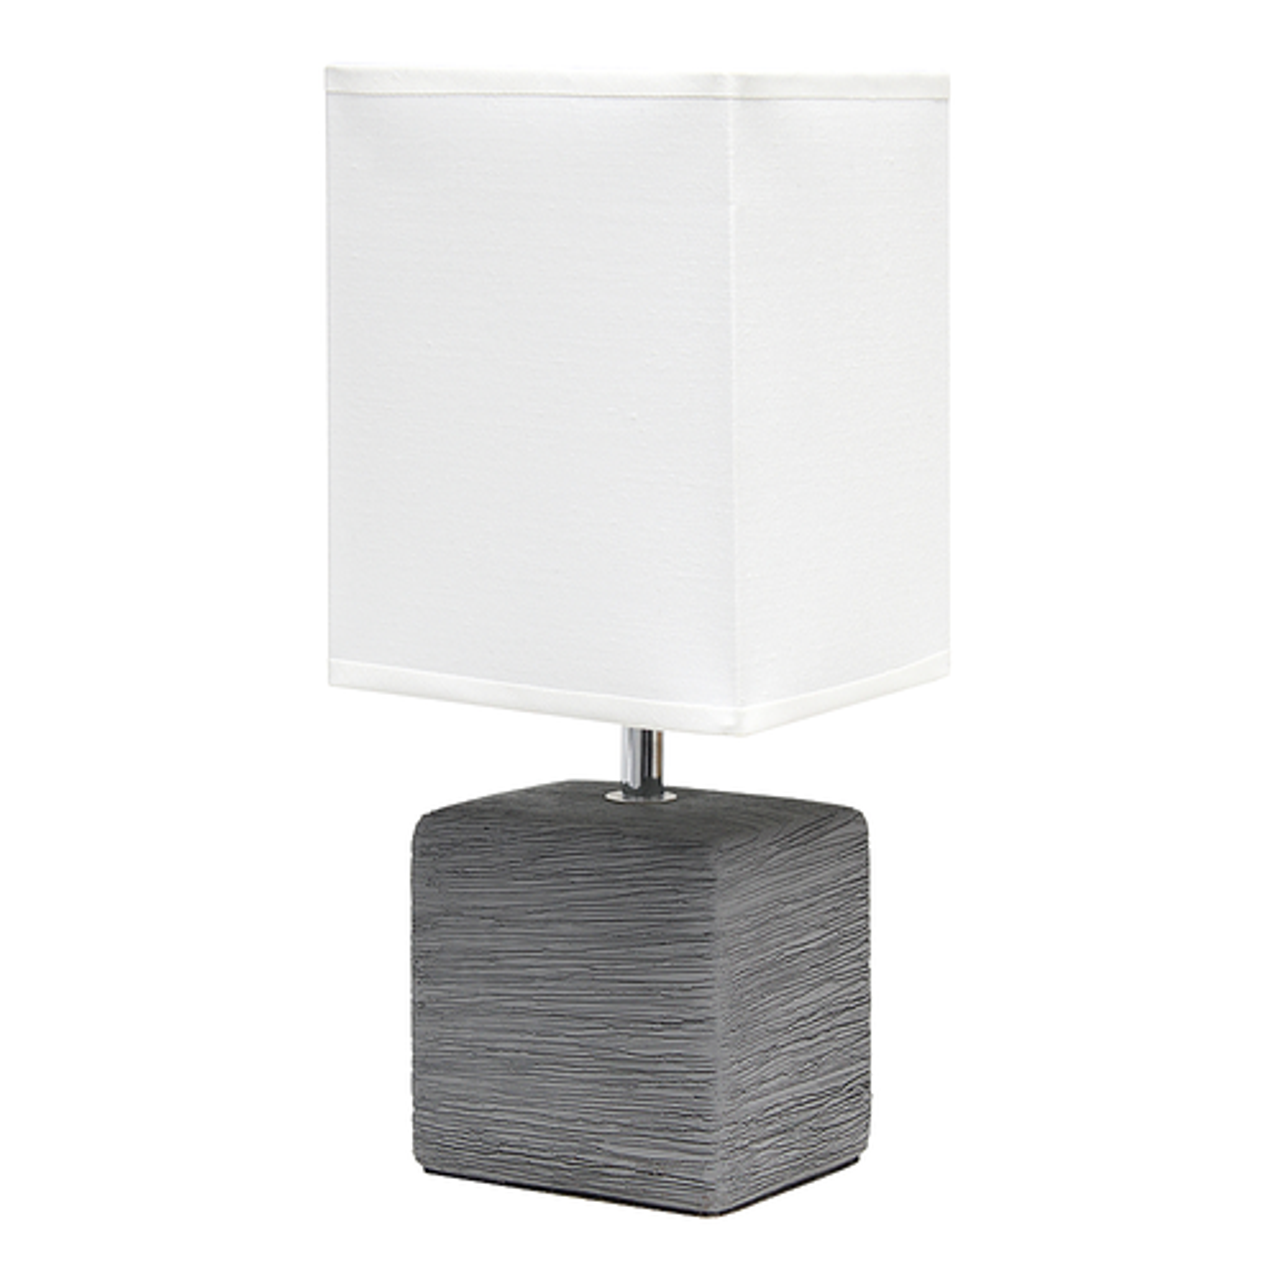 Simple Designs Petite Faux Stone Table Lamp with Fabric Shade, Gray with White Shade - Gray base/White Shade